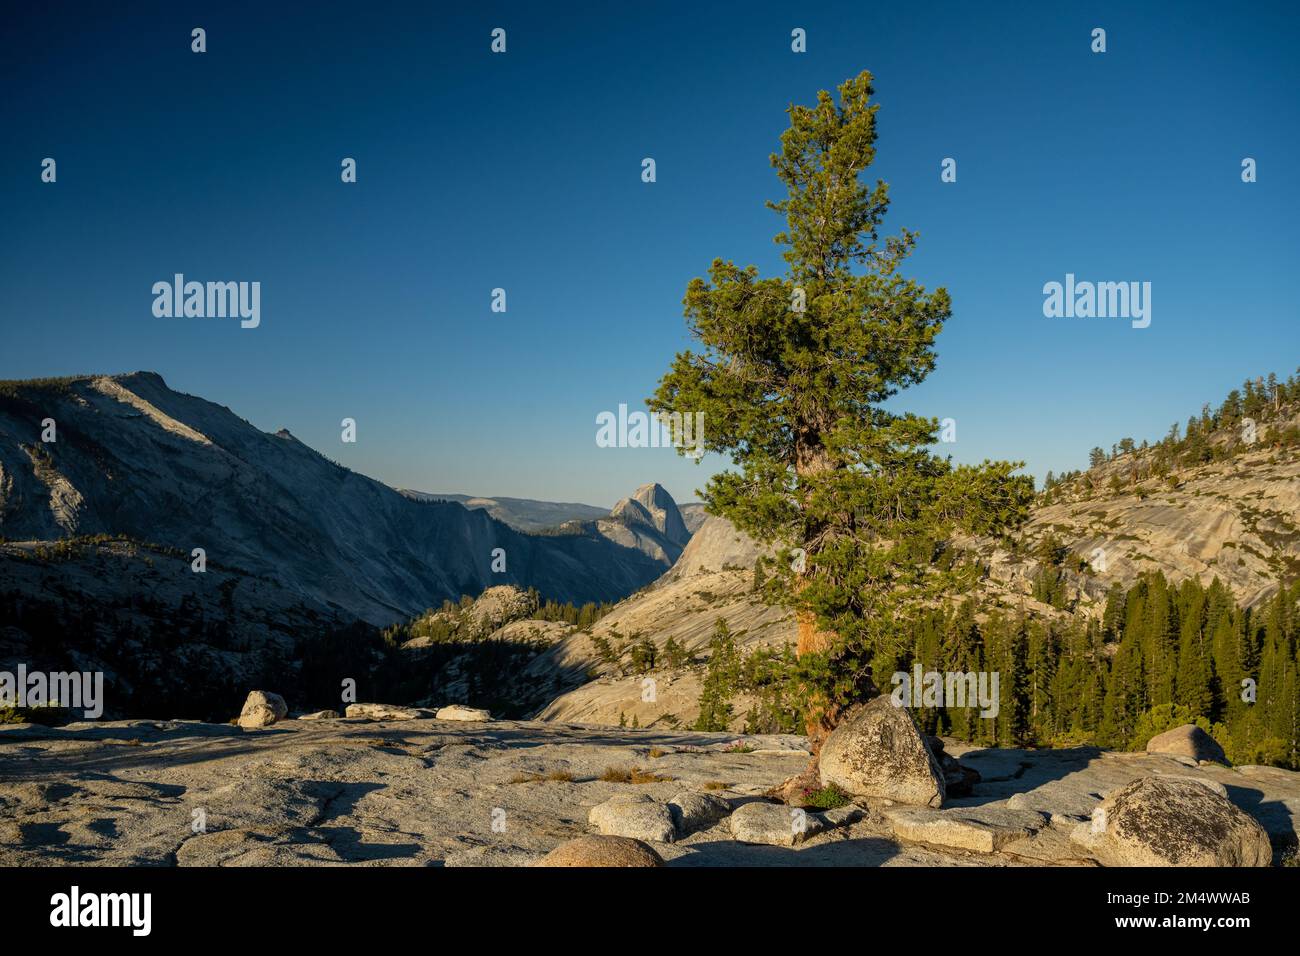 Foxtail Pine Stands Tall On Granite Overlook Surrounded By Glacial Boulders with Half Dome in the Distance Stock Photo